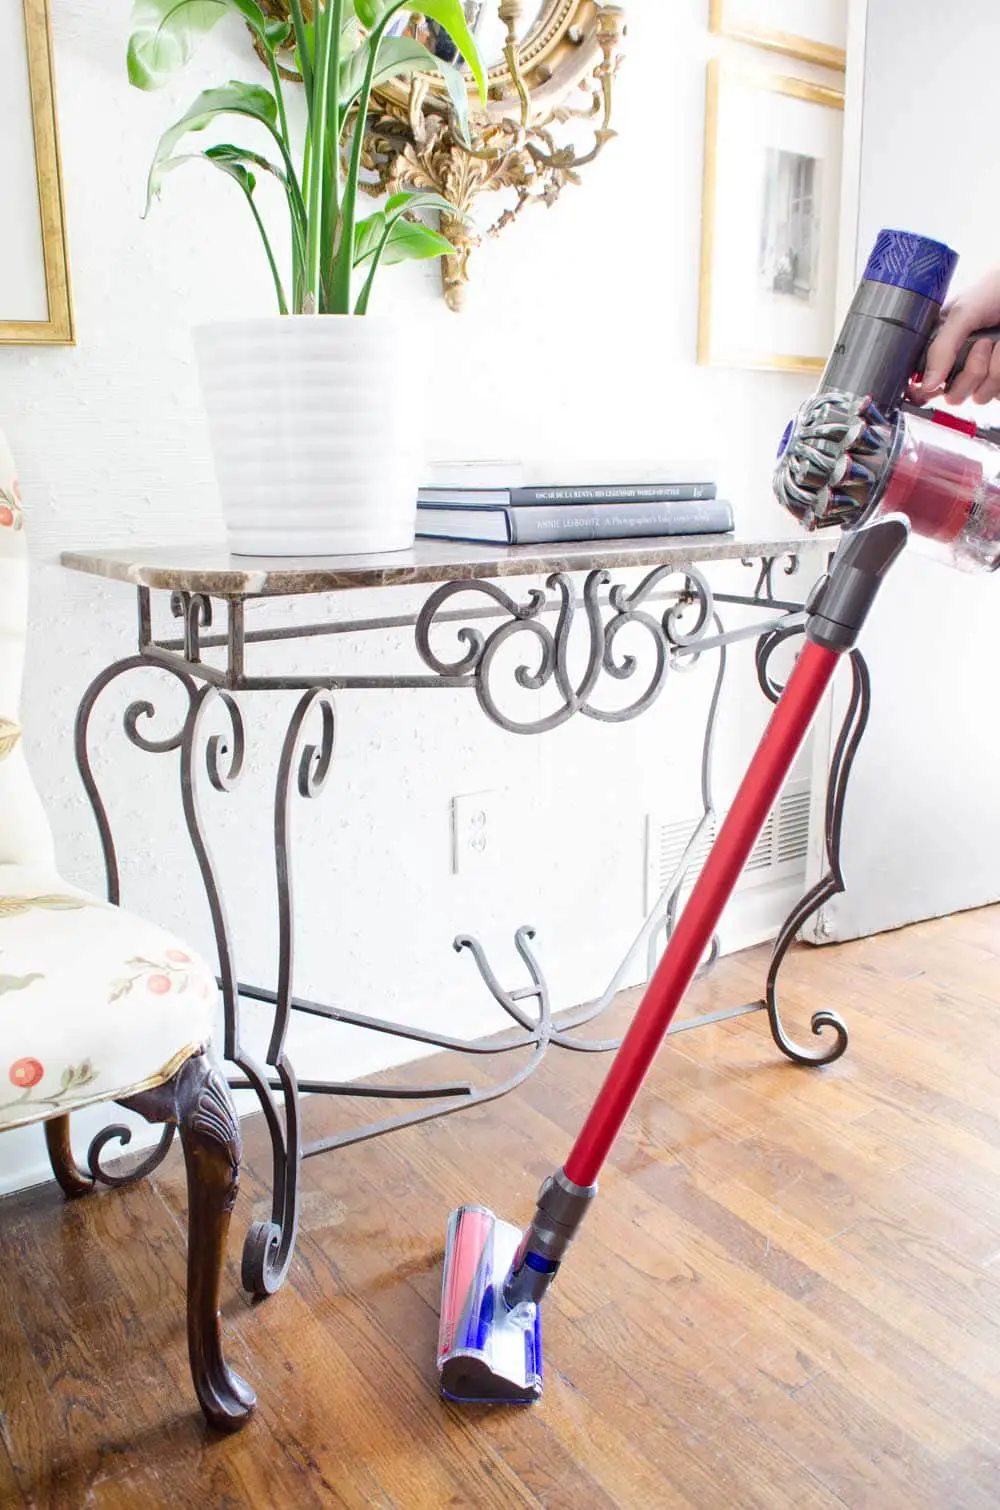 Cleaning the house with Dyson V6 cordless vacuum cleaner via @thouswellblog